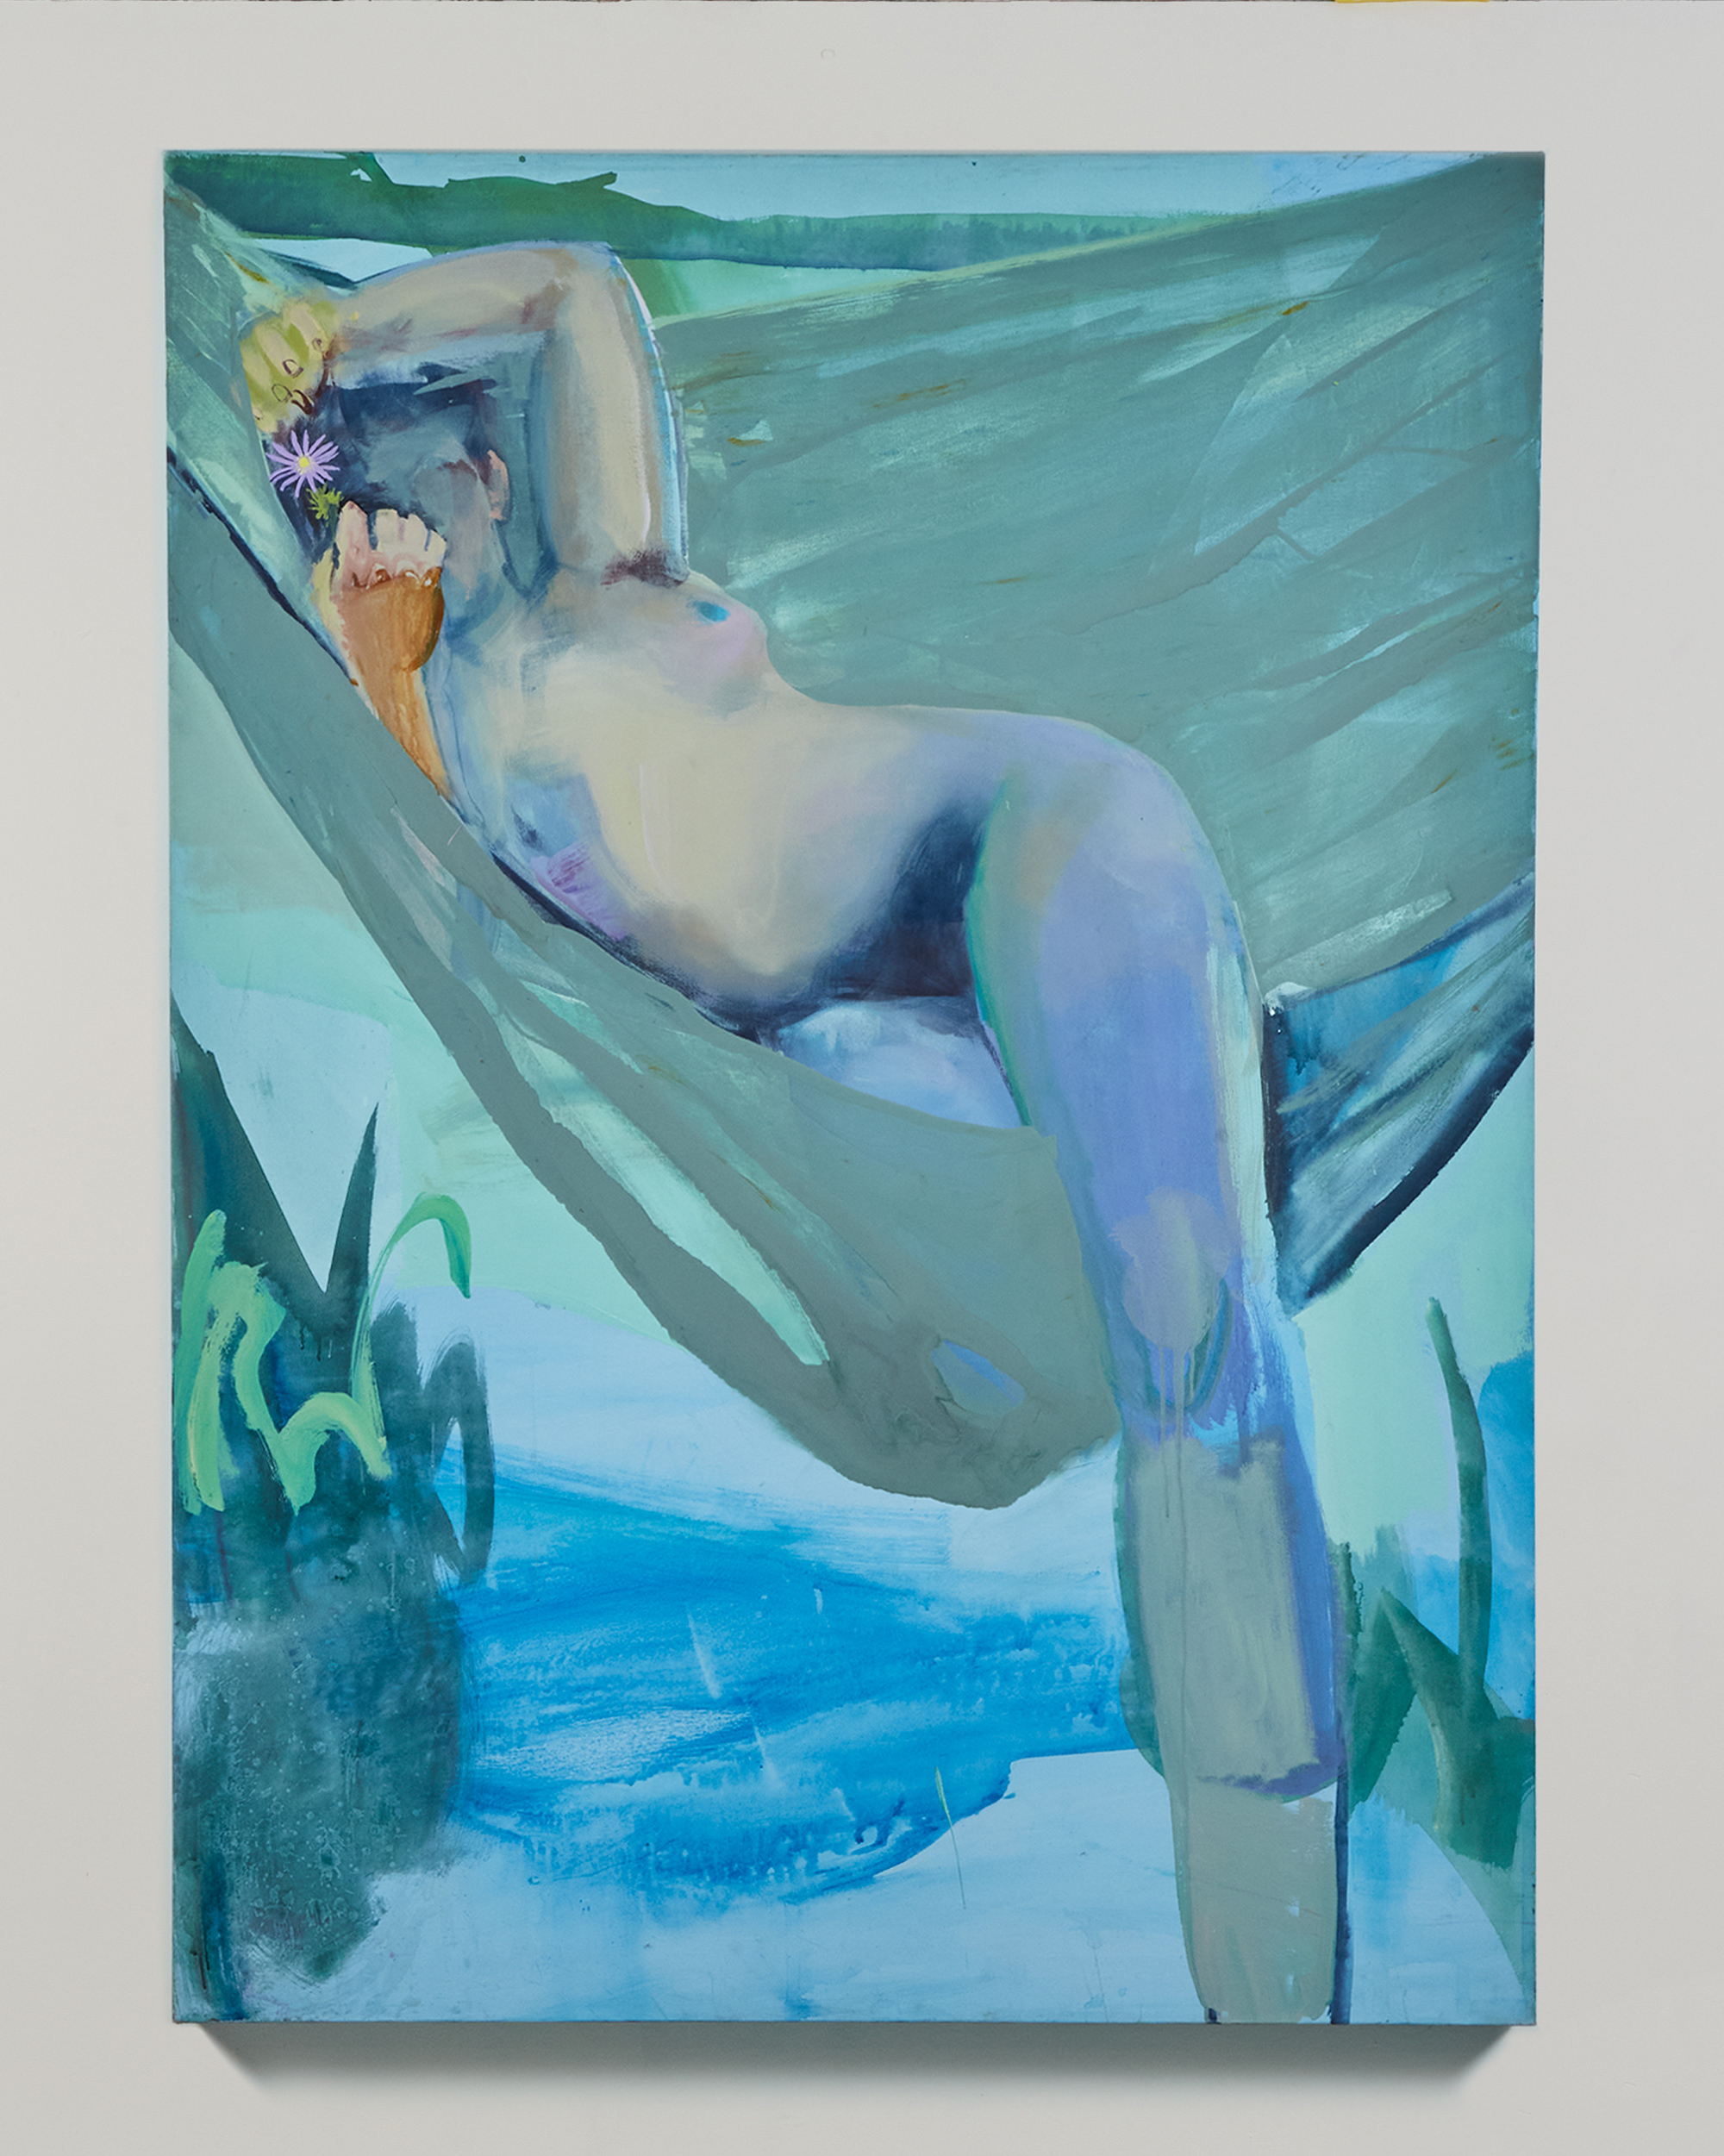 A blue hued painting of a nude woman on a hammock